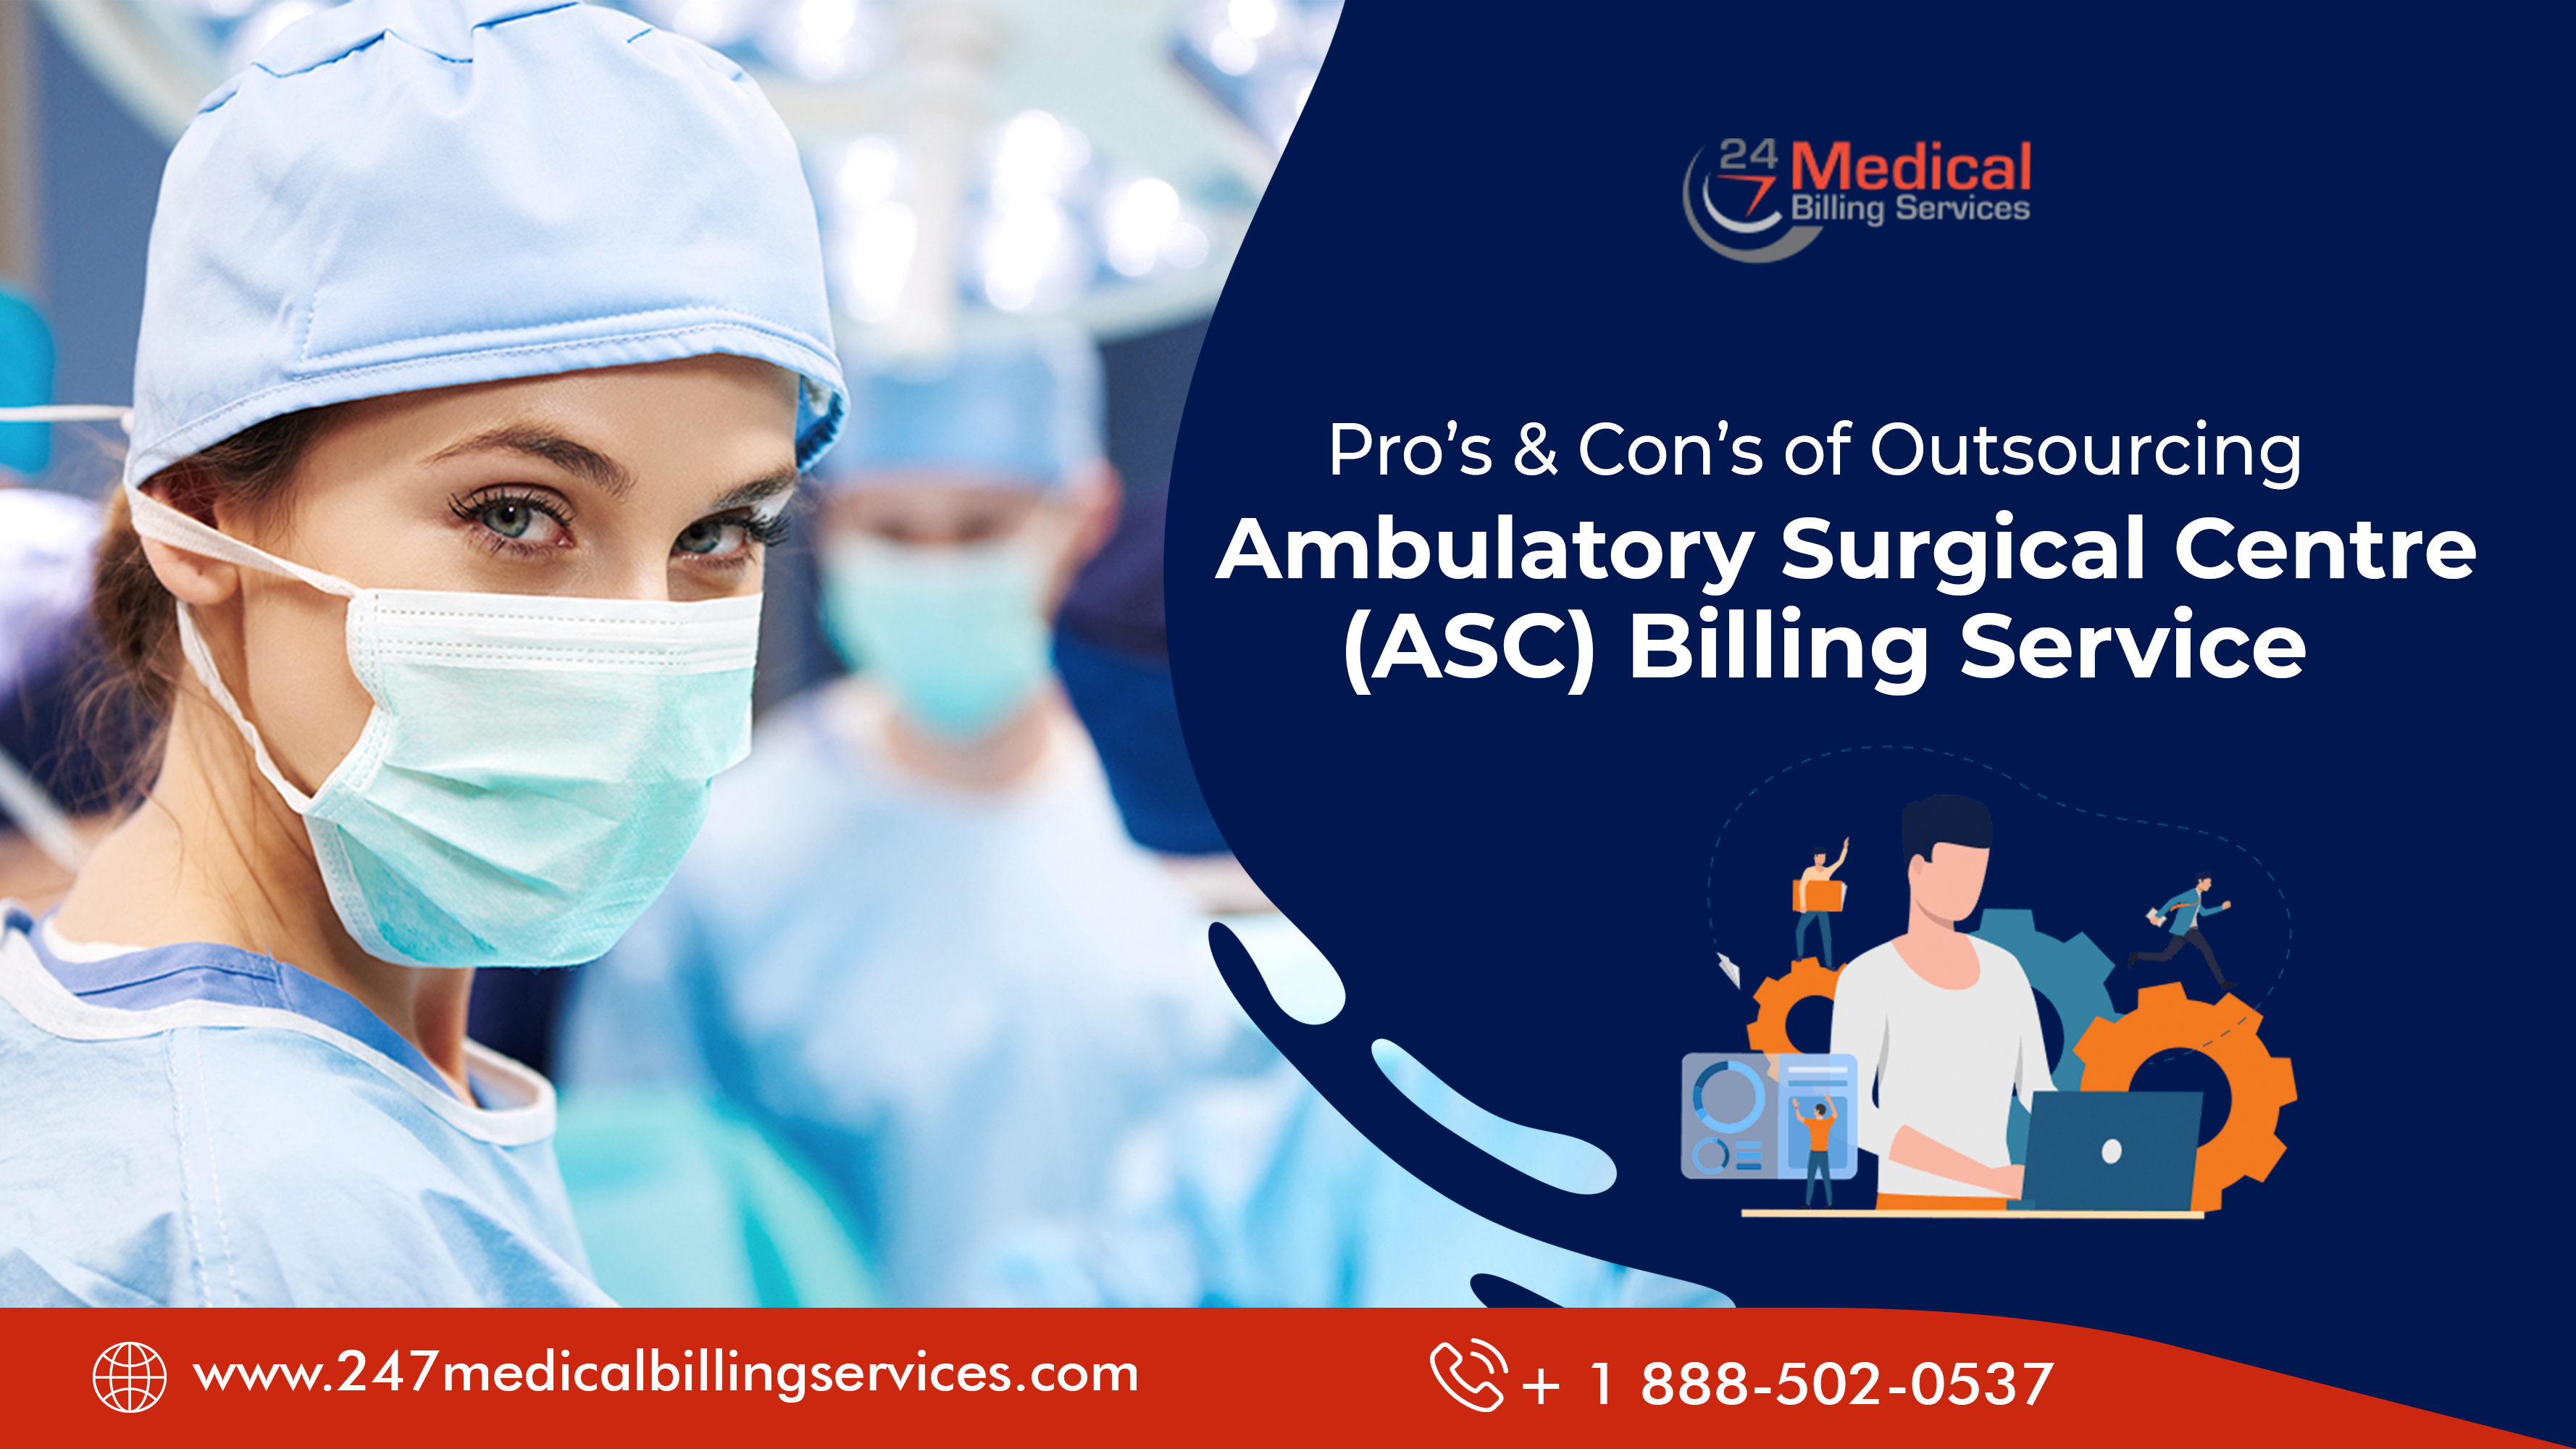  Pros & Cons of Outsourcing Ambulatory Surgical Centre (ASC) Billing Service